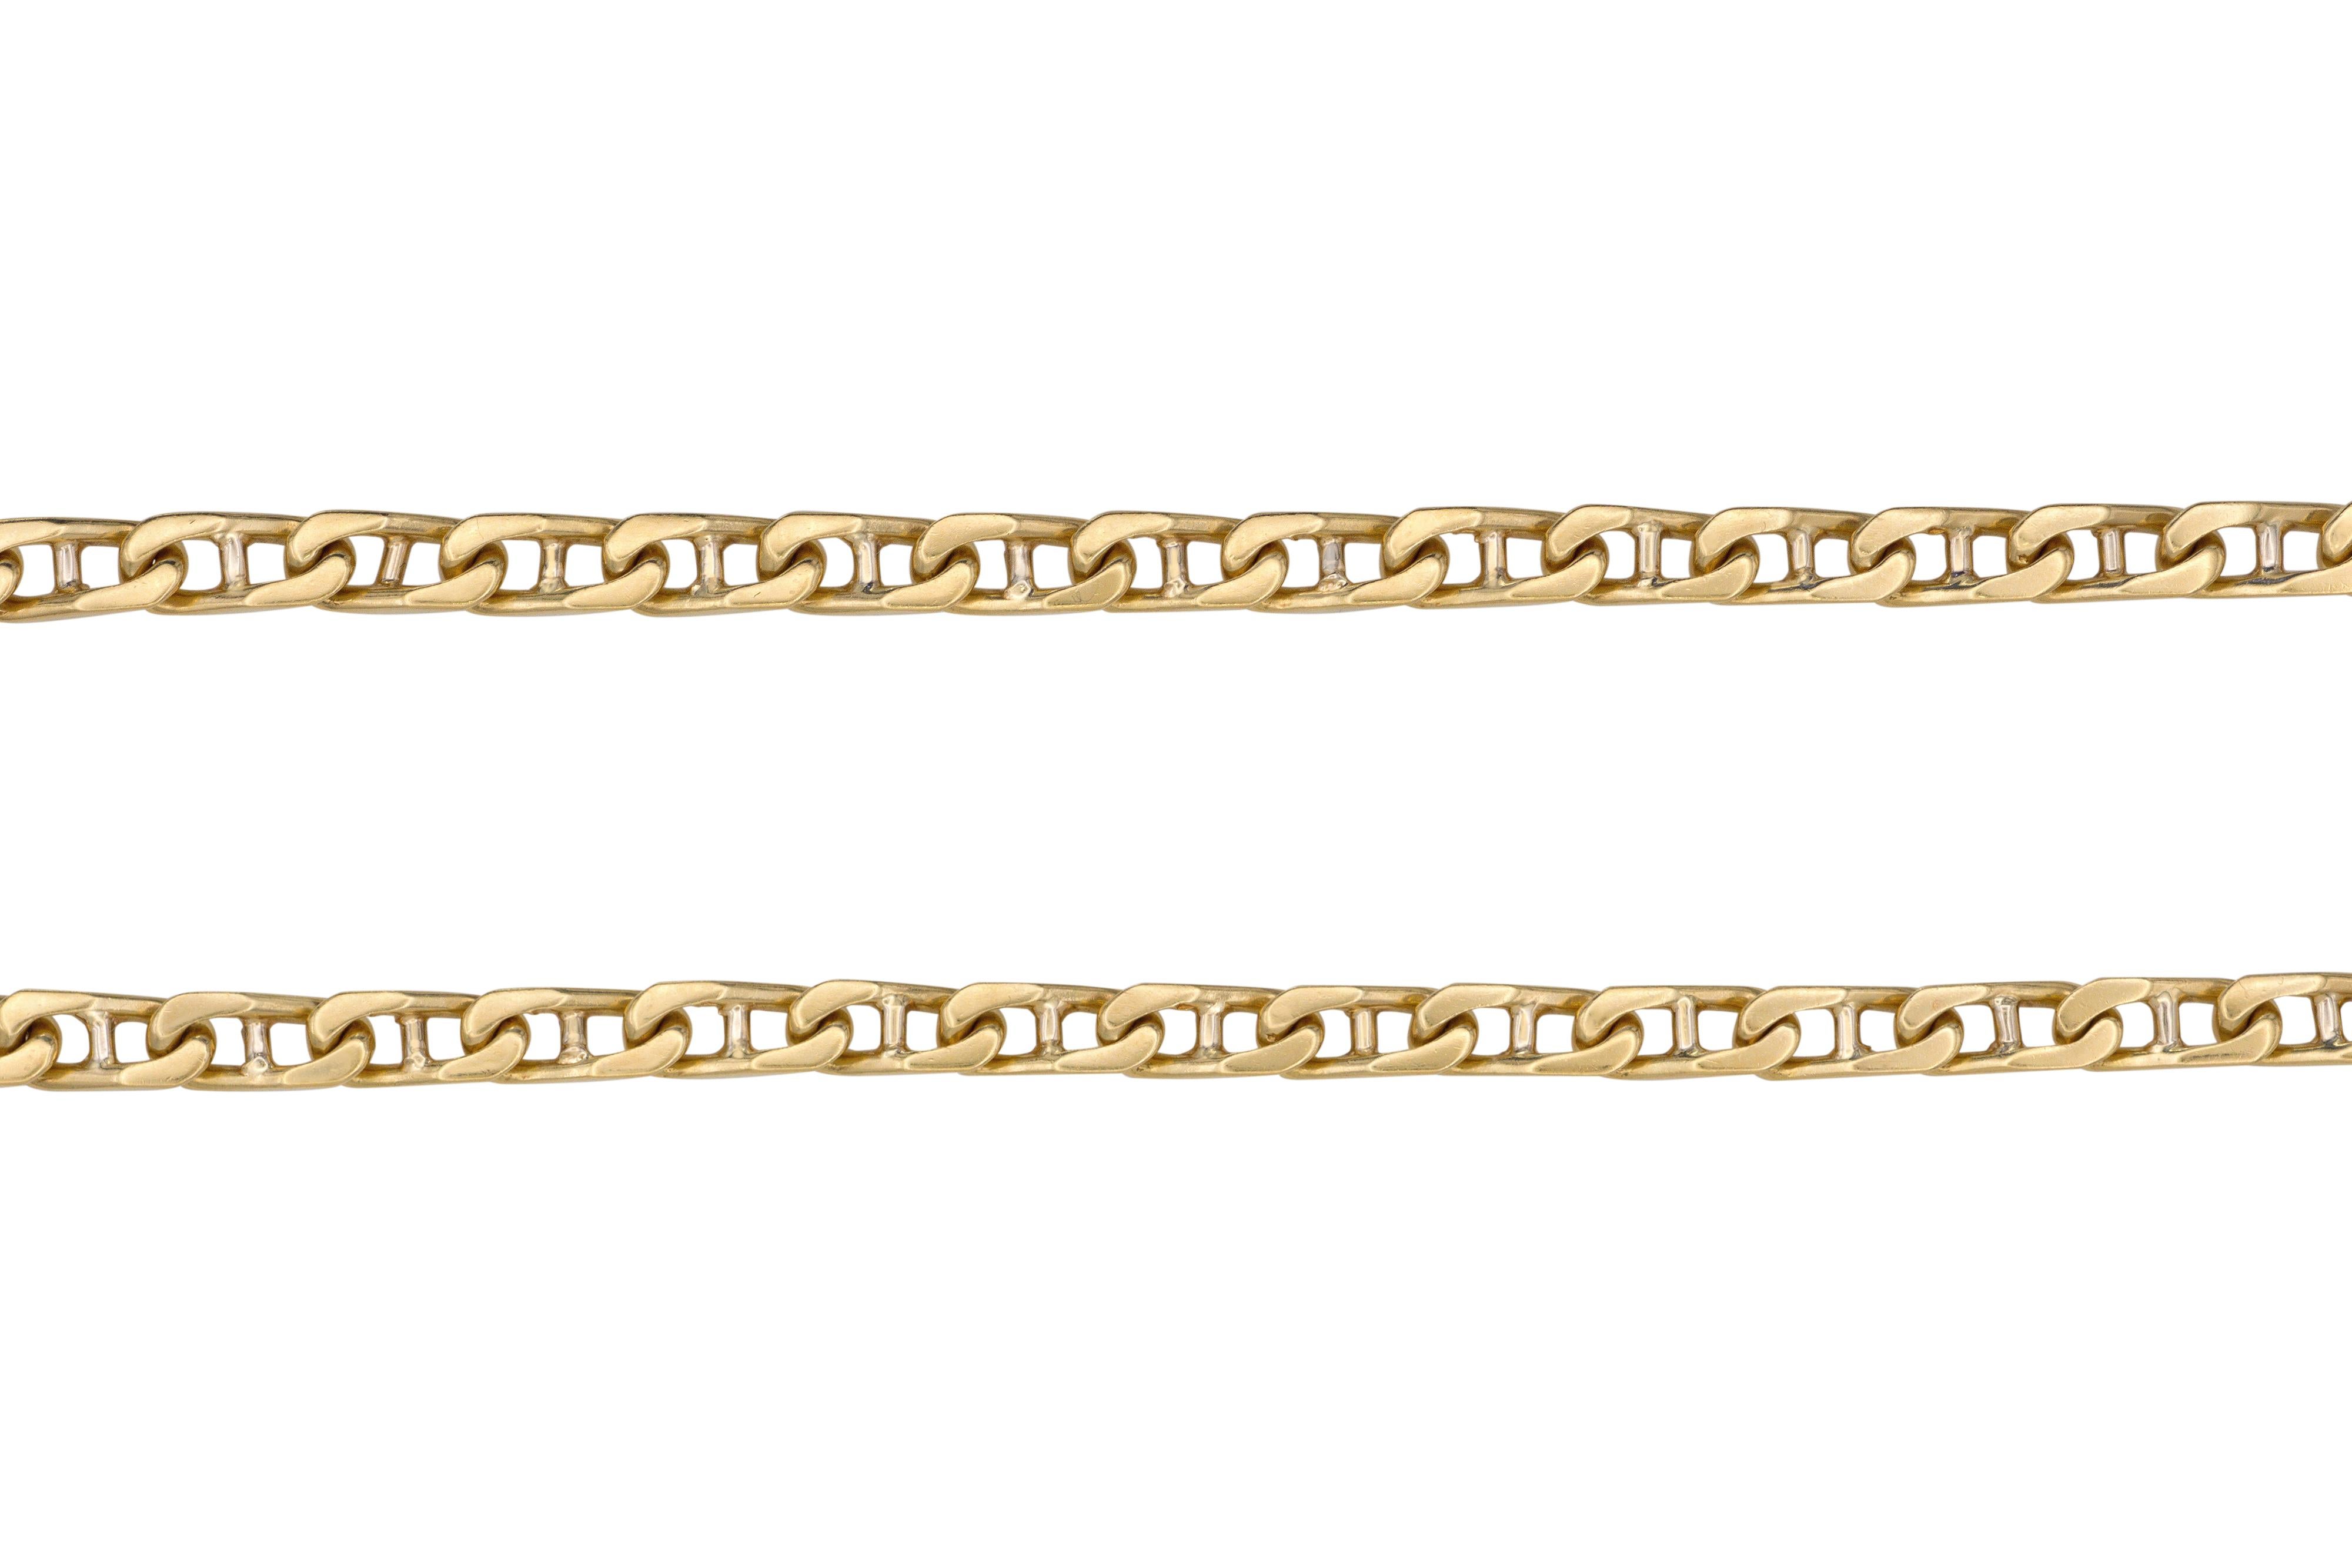 A classic, 32 inch long, vintage 18 karat gold mariner's link chain, by Bulgari, c. 1980. 

Signed BVLGARI, stamped 18kt MADE ITALY. 

This timeless everyday piece is a chic complement to any outfit. Wear it layered with gold chains or by itself; it